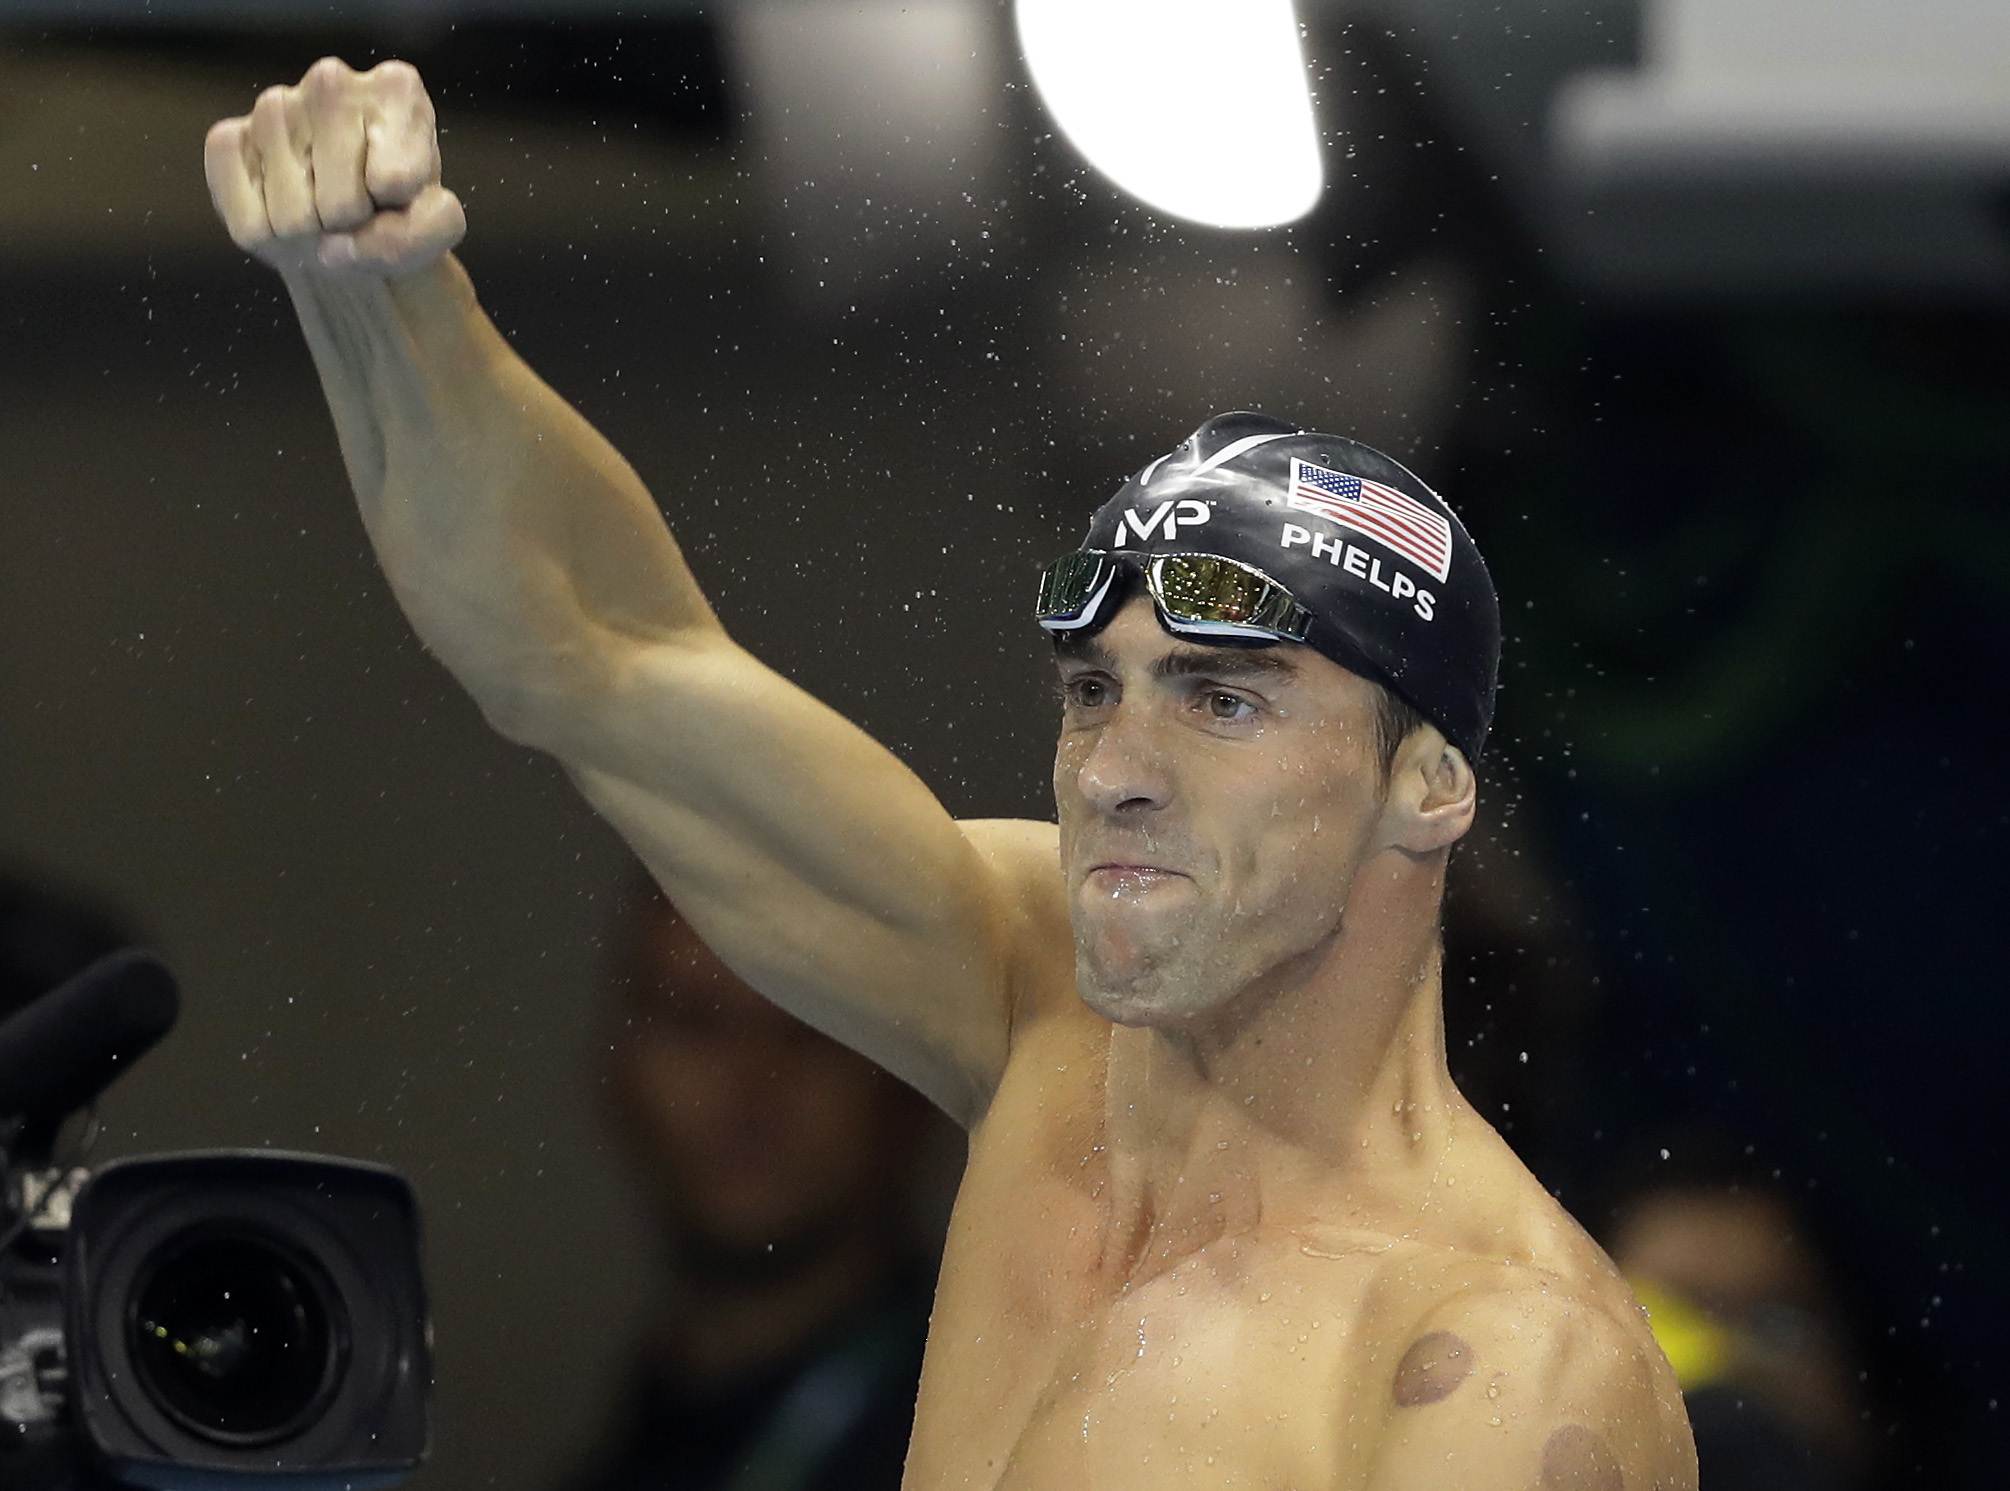 United States' Michael Phelps celebrates after winning the gold medal during the swimming competitions at the 2016 Summer Olympics, Tuesday, Aug. 9, 2016, in Rio de Janeiro, Brazil.